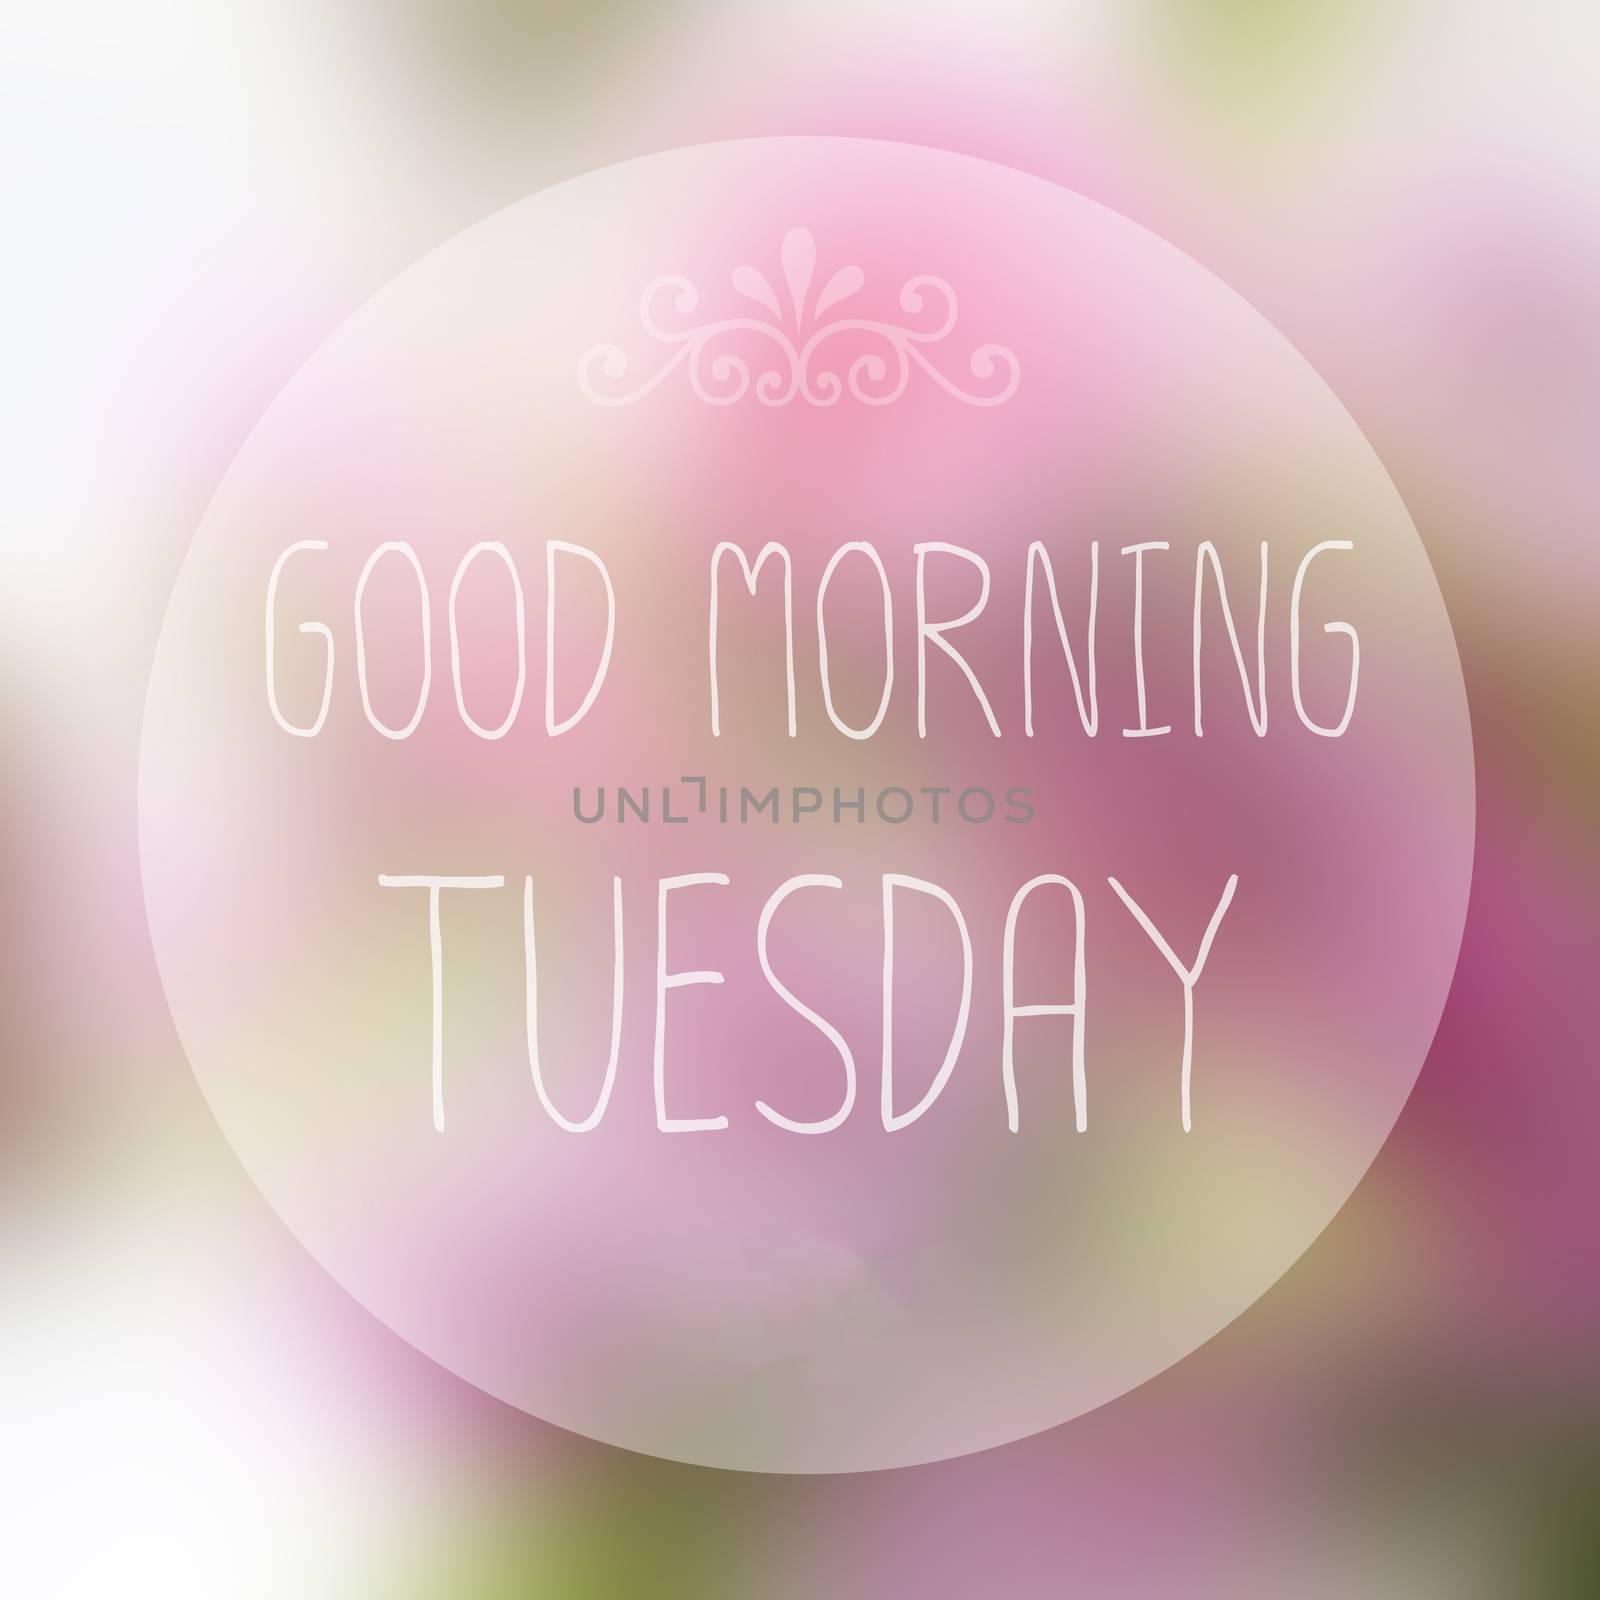 Good Morning Tuesday on blur background